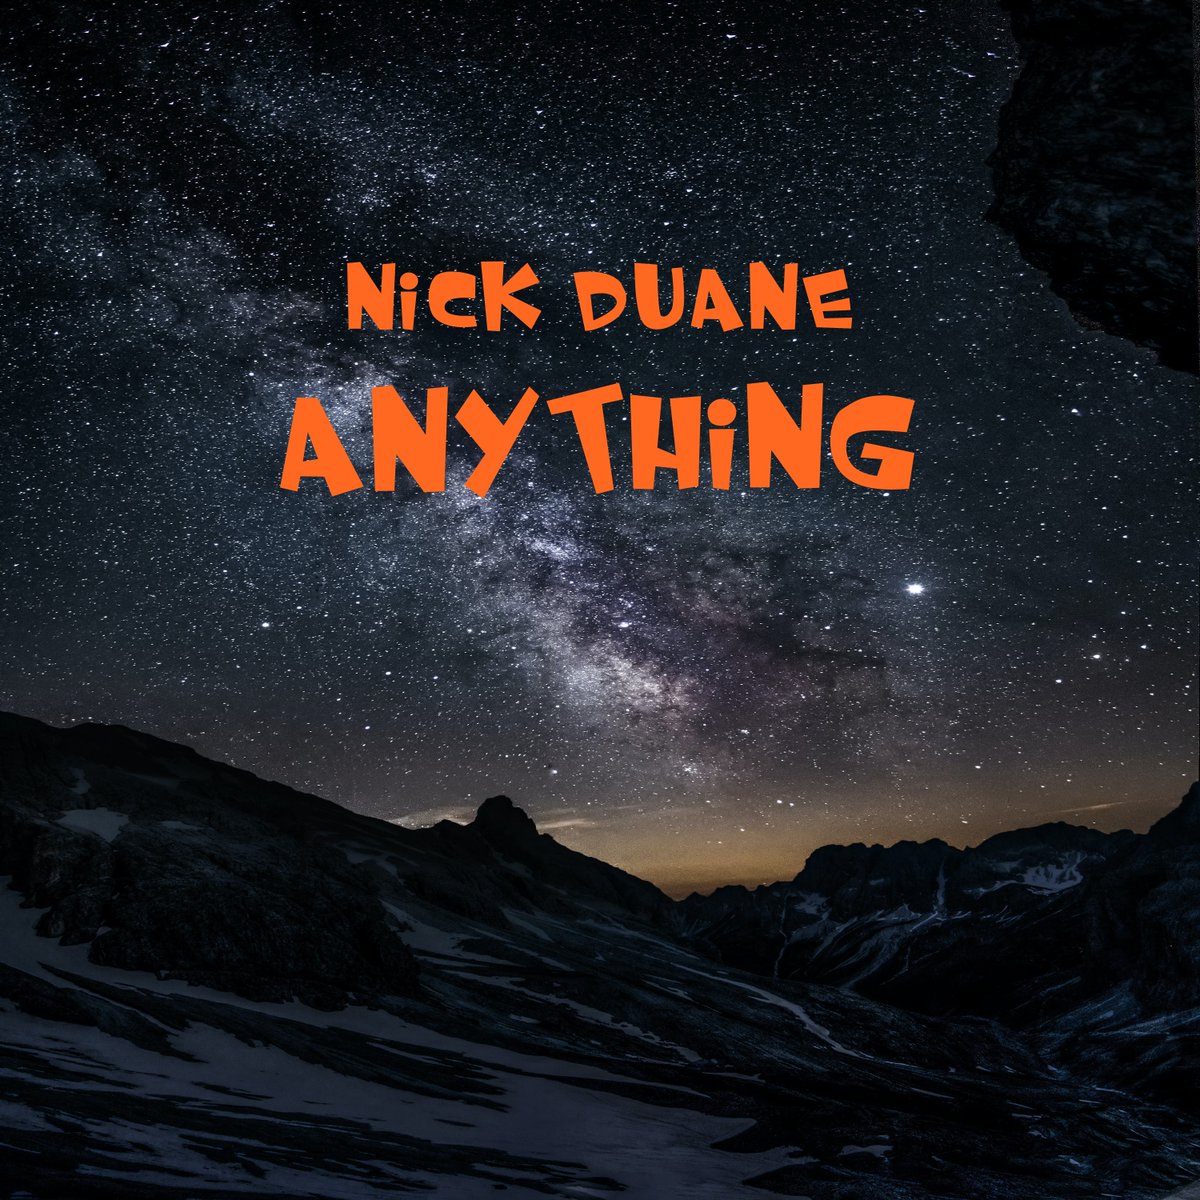 On Friday, May 3, at 4:00 AM, and at 4:00 PM (Pacific Time), we play 'Anything' by Nick Duane @nick_duane. Come and listen at Lonelyoakradio.com / #Indieshuffle Classics show